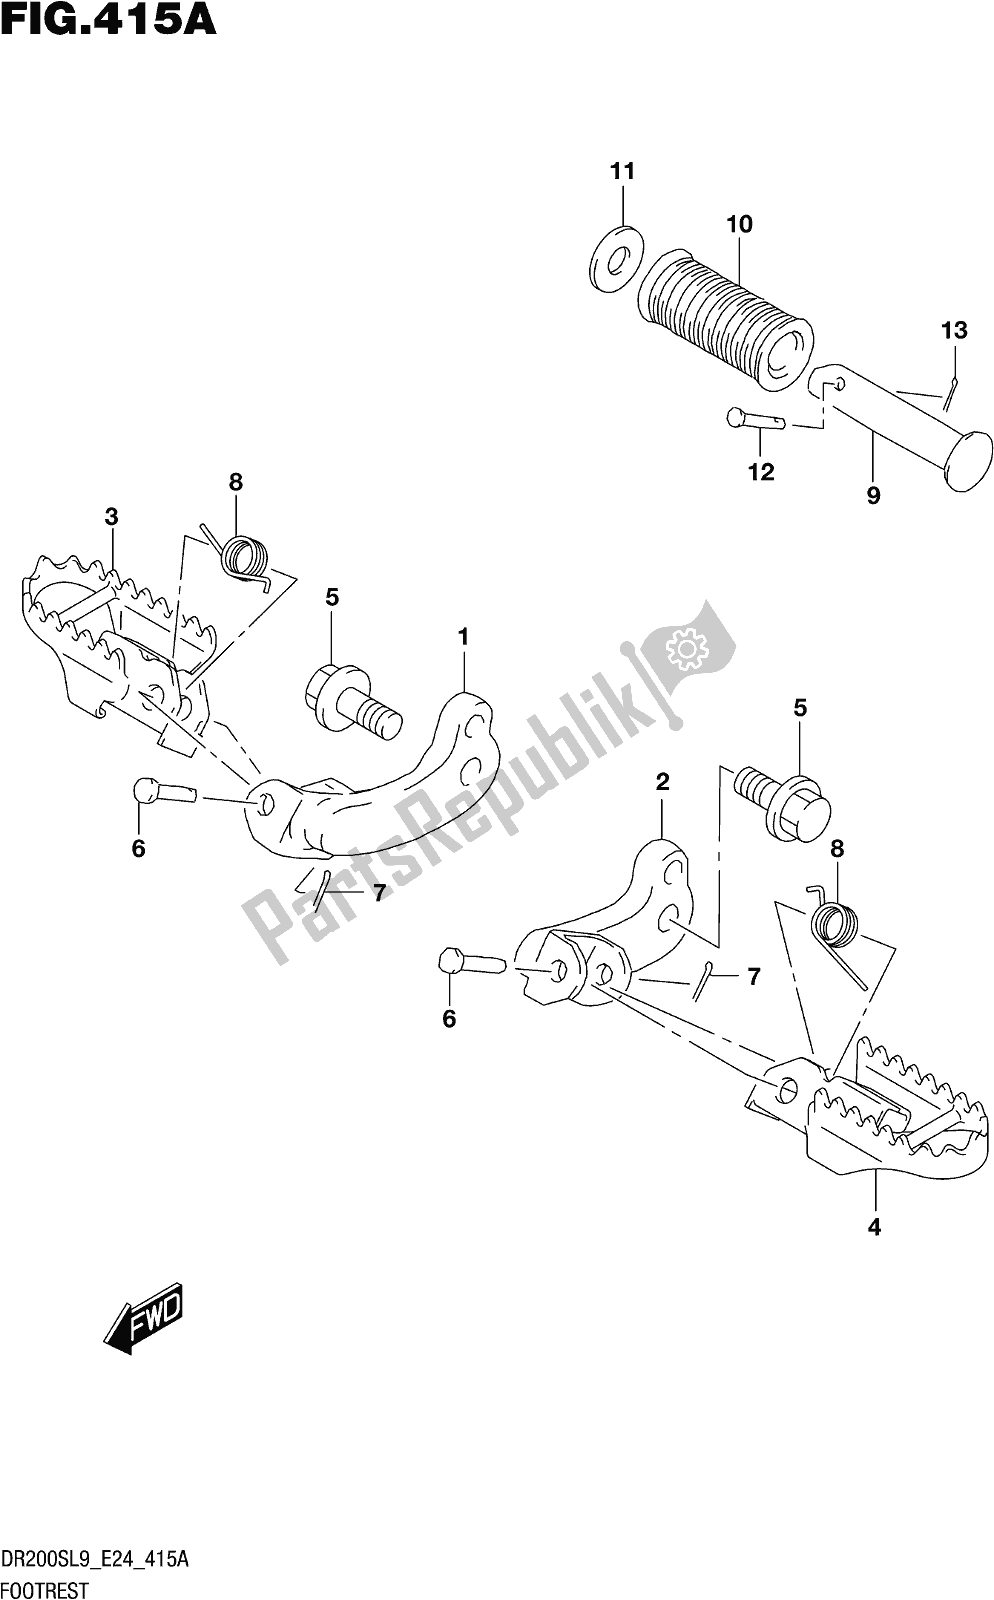 All parts for the Fig. 415a Footrest of the Suzuki DR 200S 2019